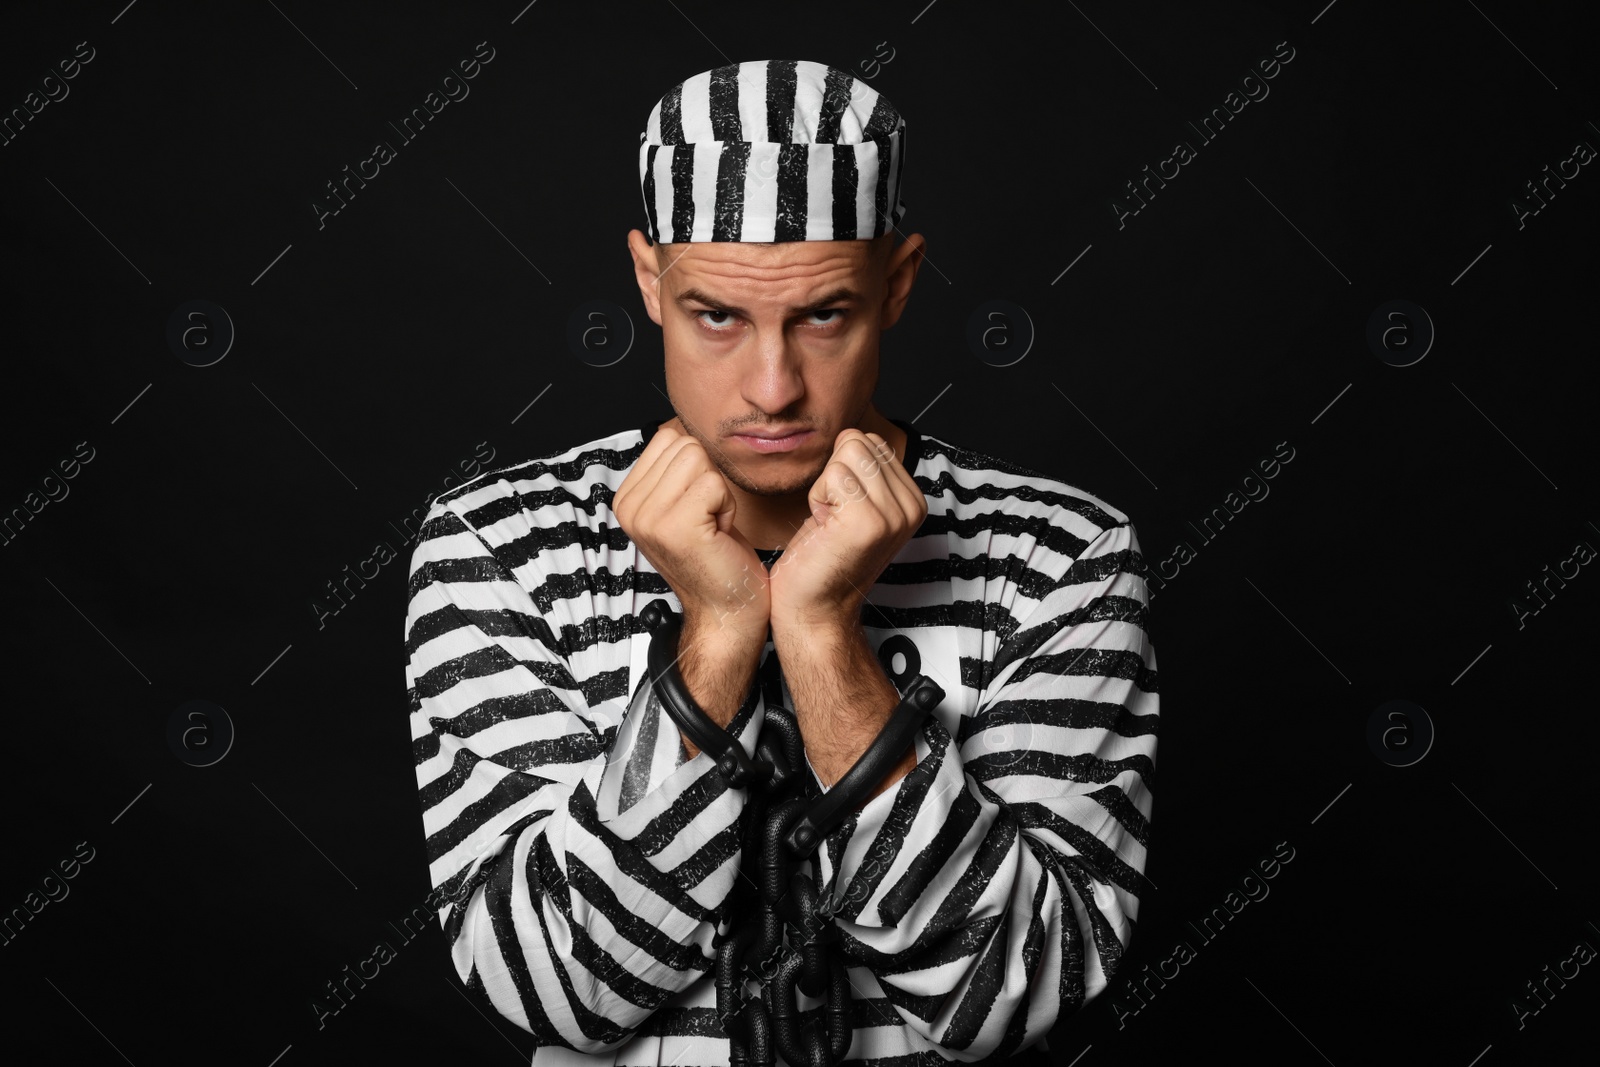 Photo of Prisoner in striped uniform with chained hands on black background